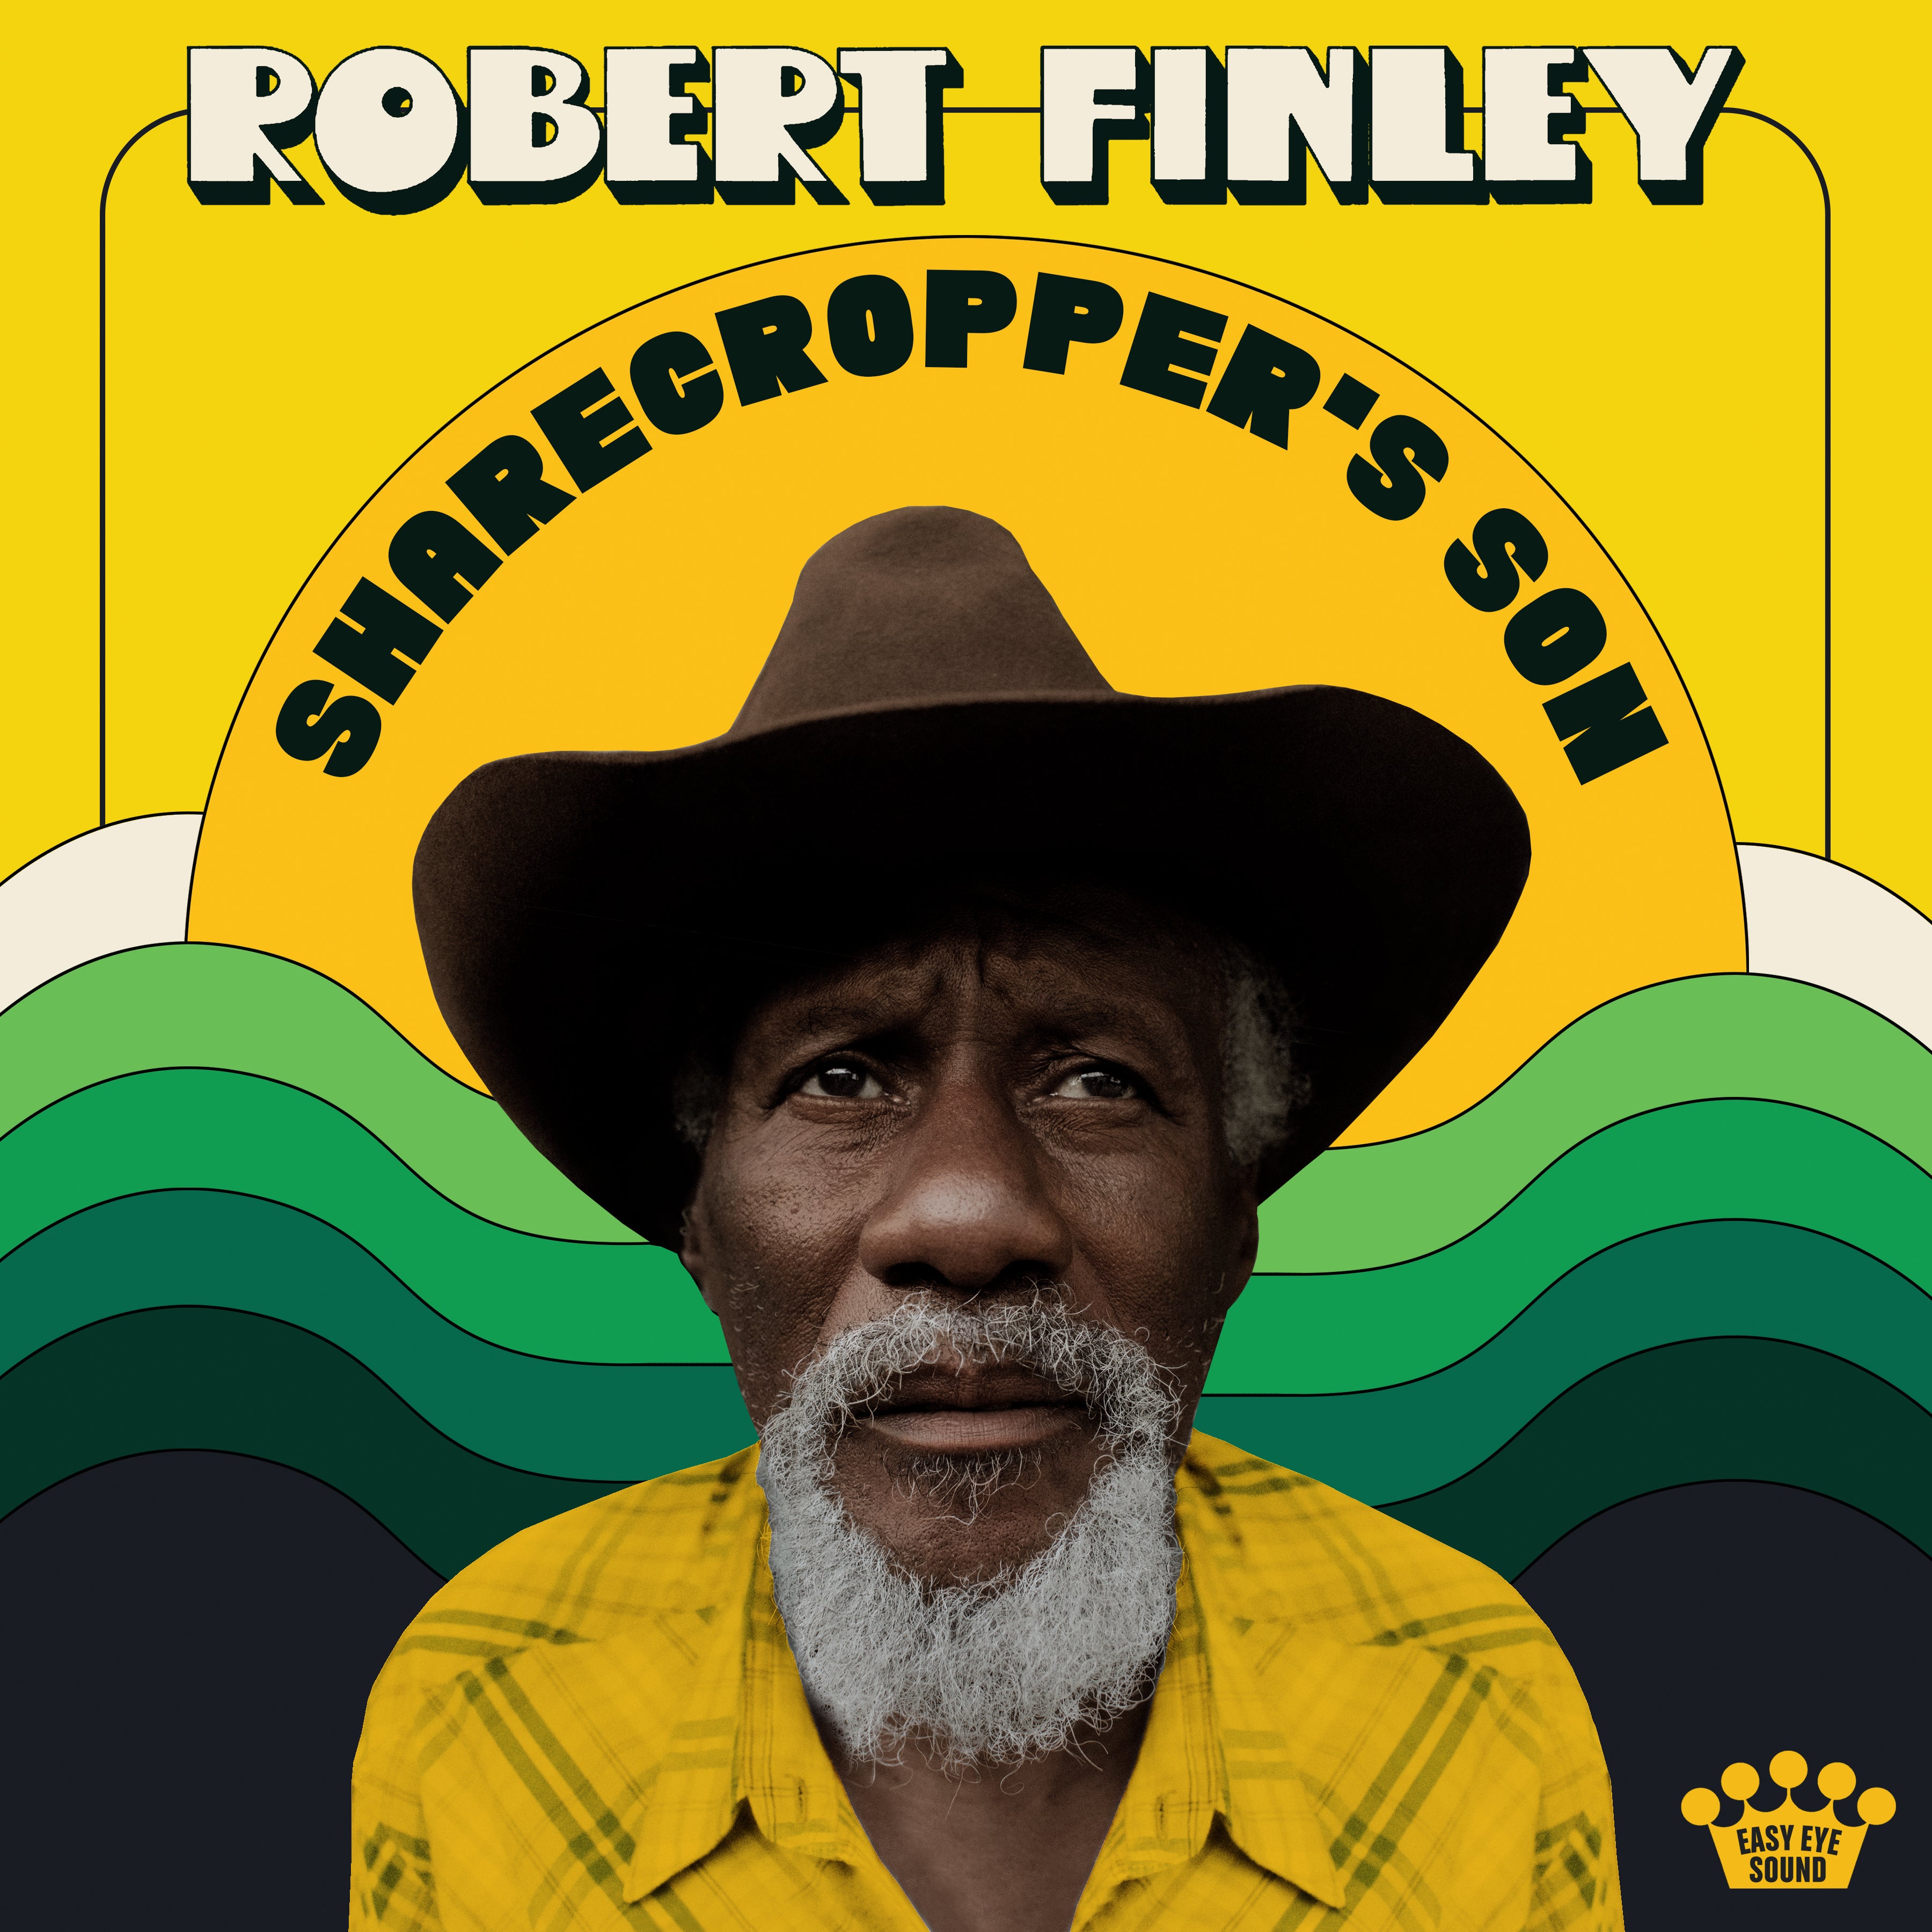 LISTEN TO THE TITLE TRACK FROM ROBERT FINLEY’S ‘SHARECROPPER’S SON’